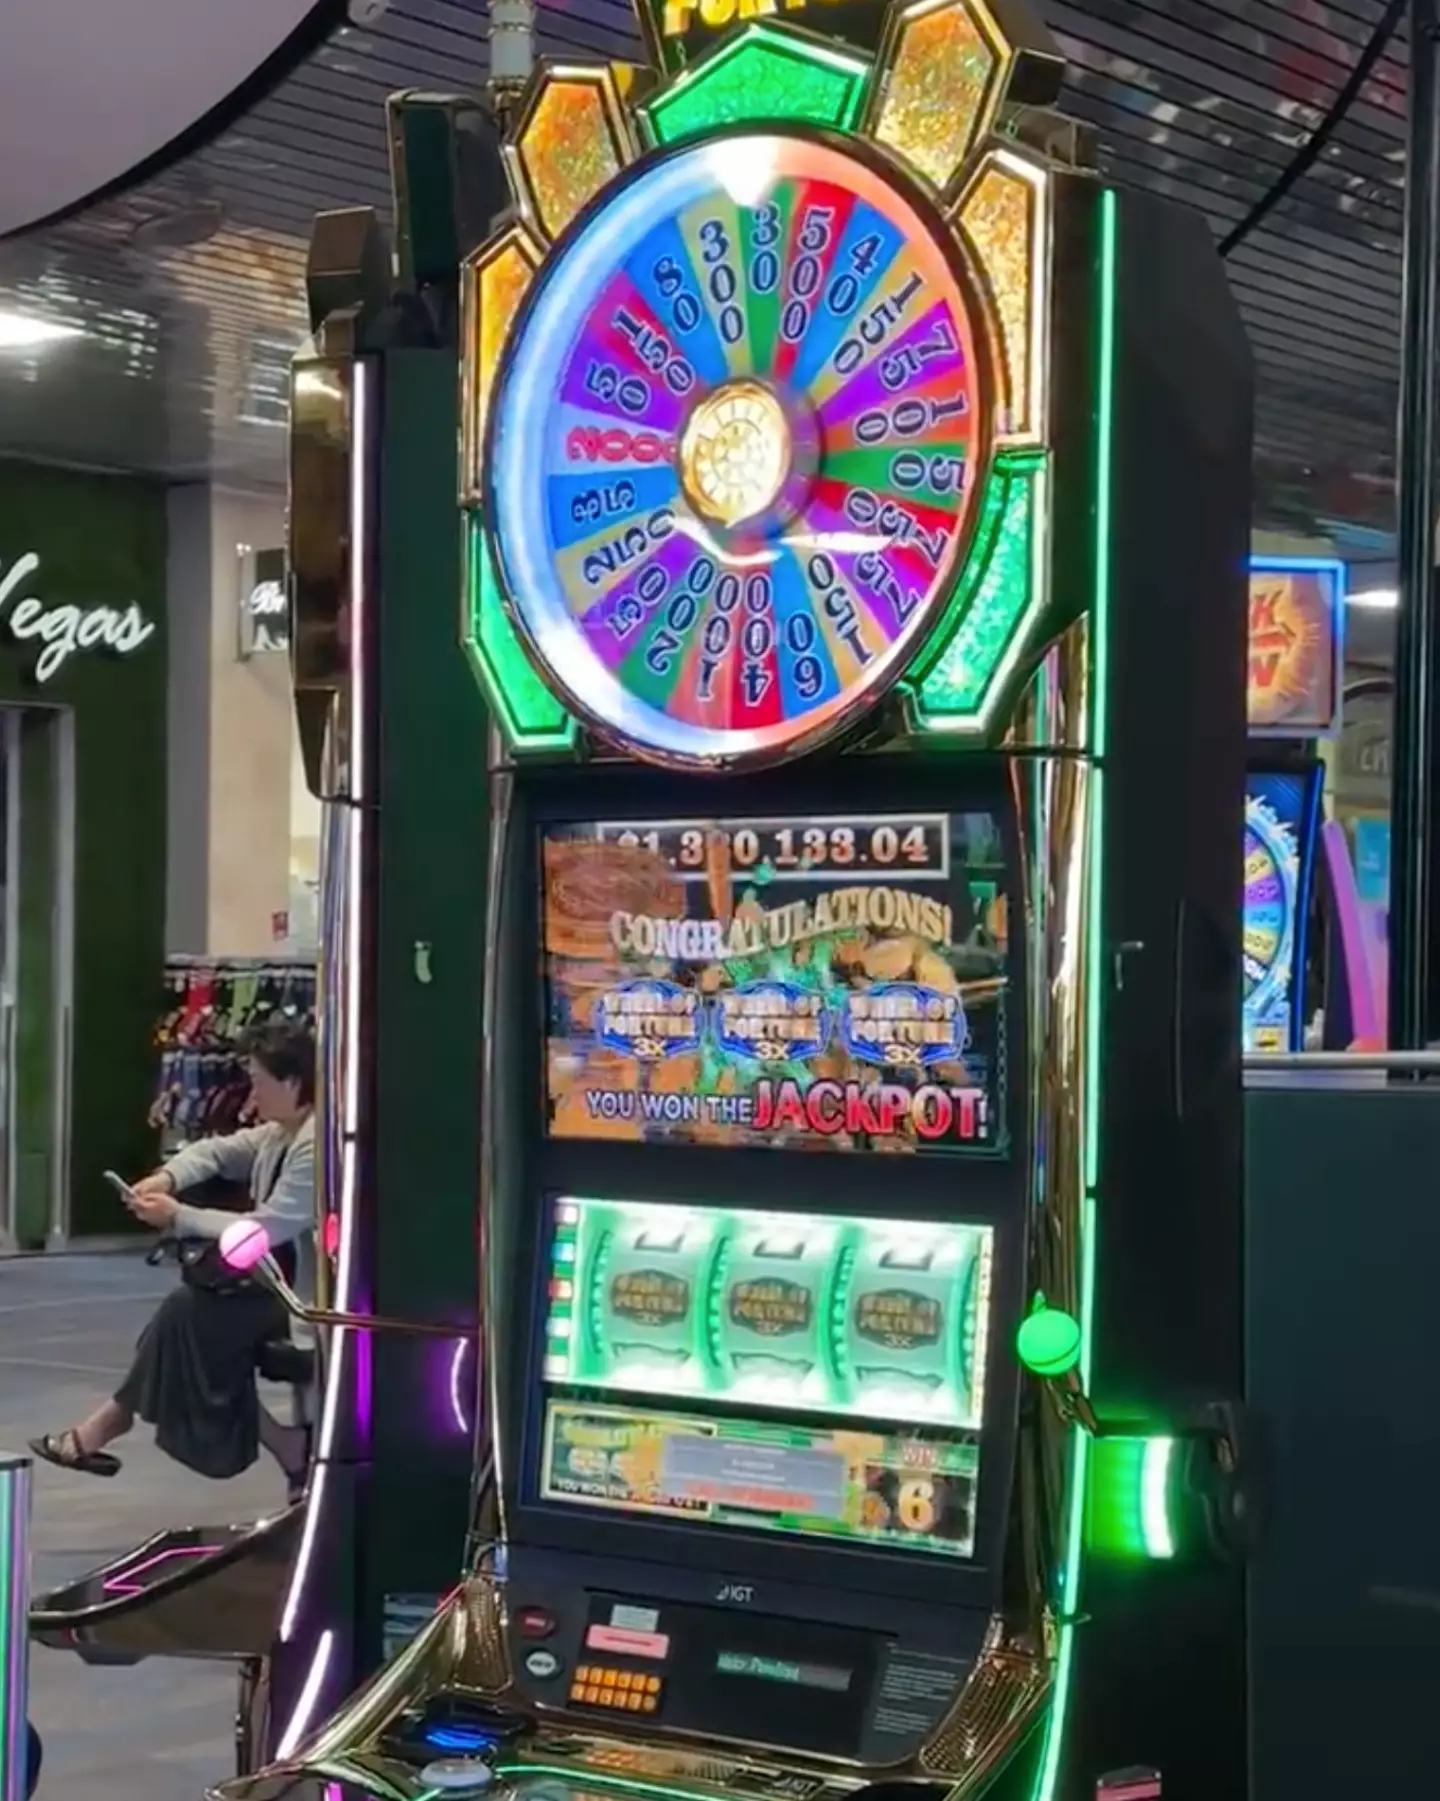 The lucky tourist cashed in some big bucks at the Las Vegas airport.